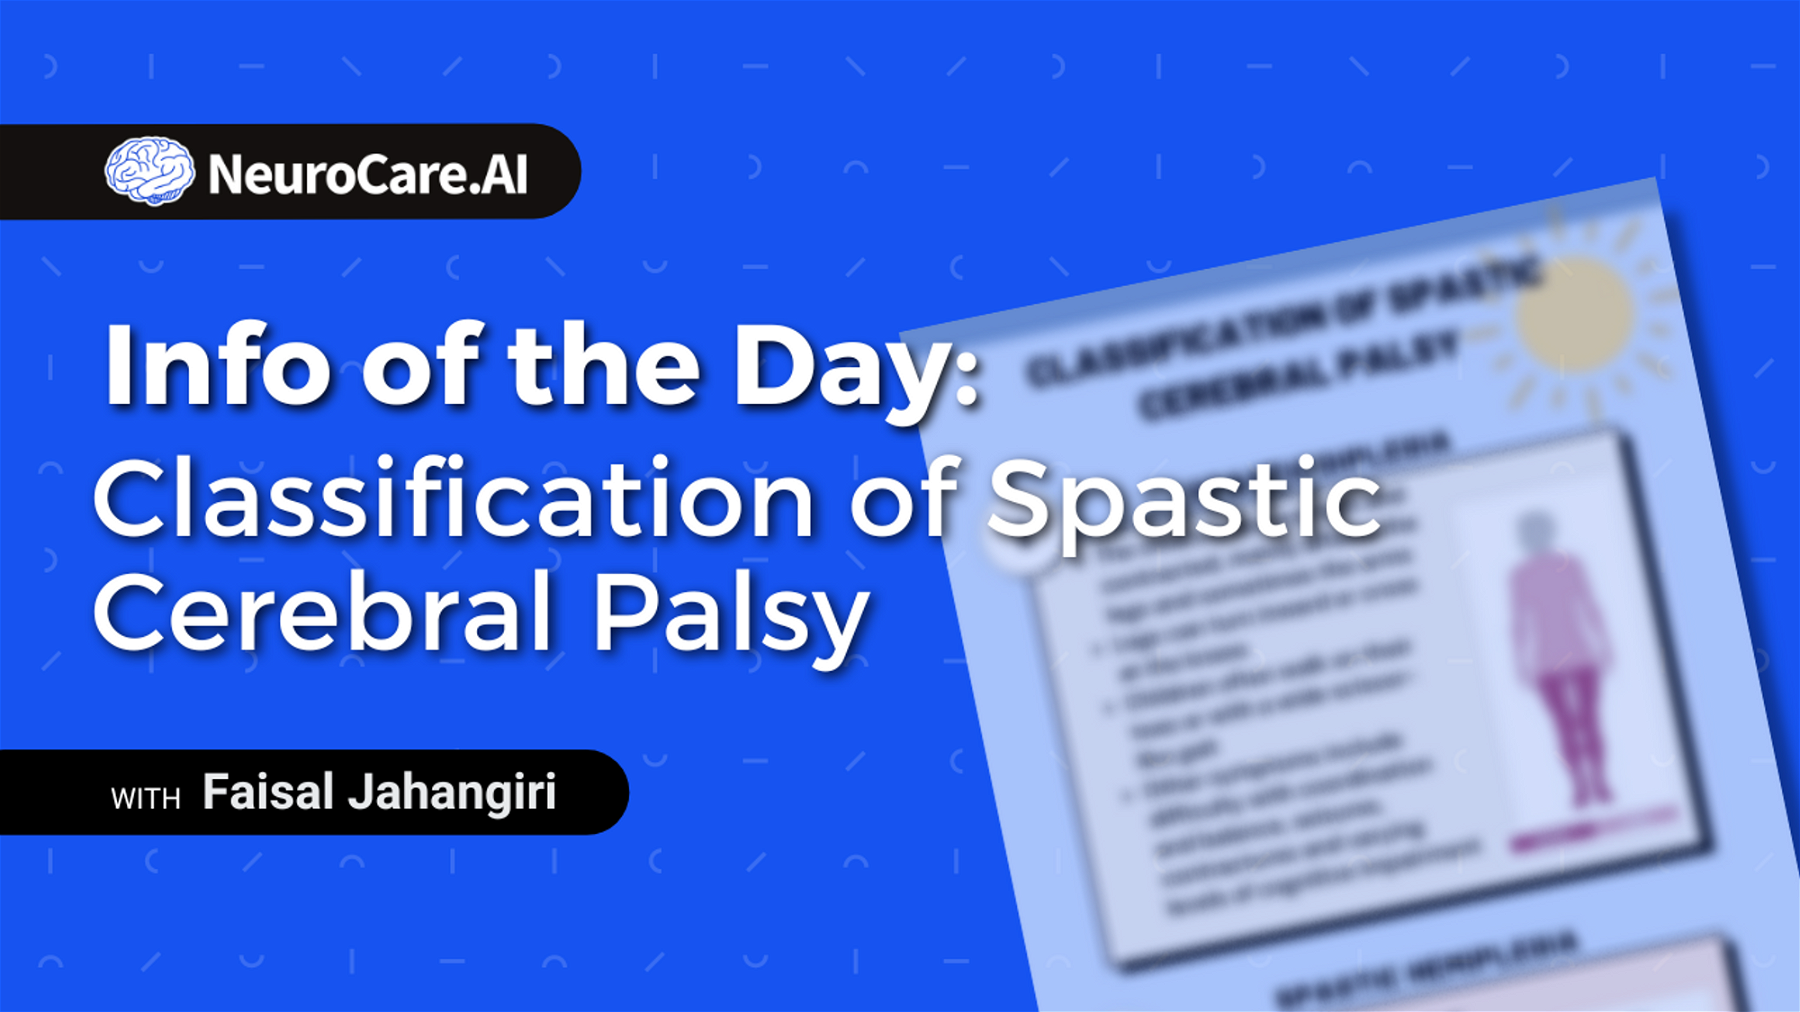 Info of the Day: "Classification of Spastic Cerebral Palsy"